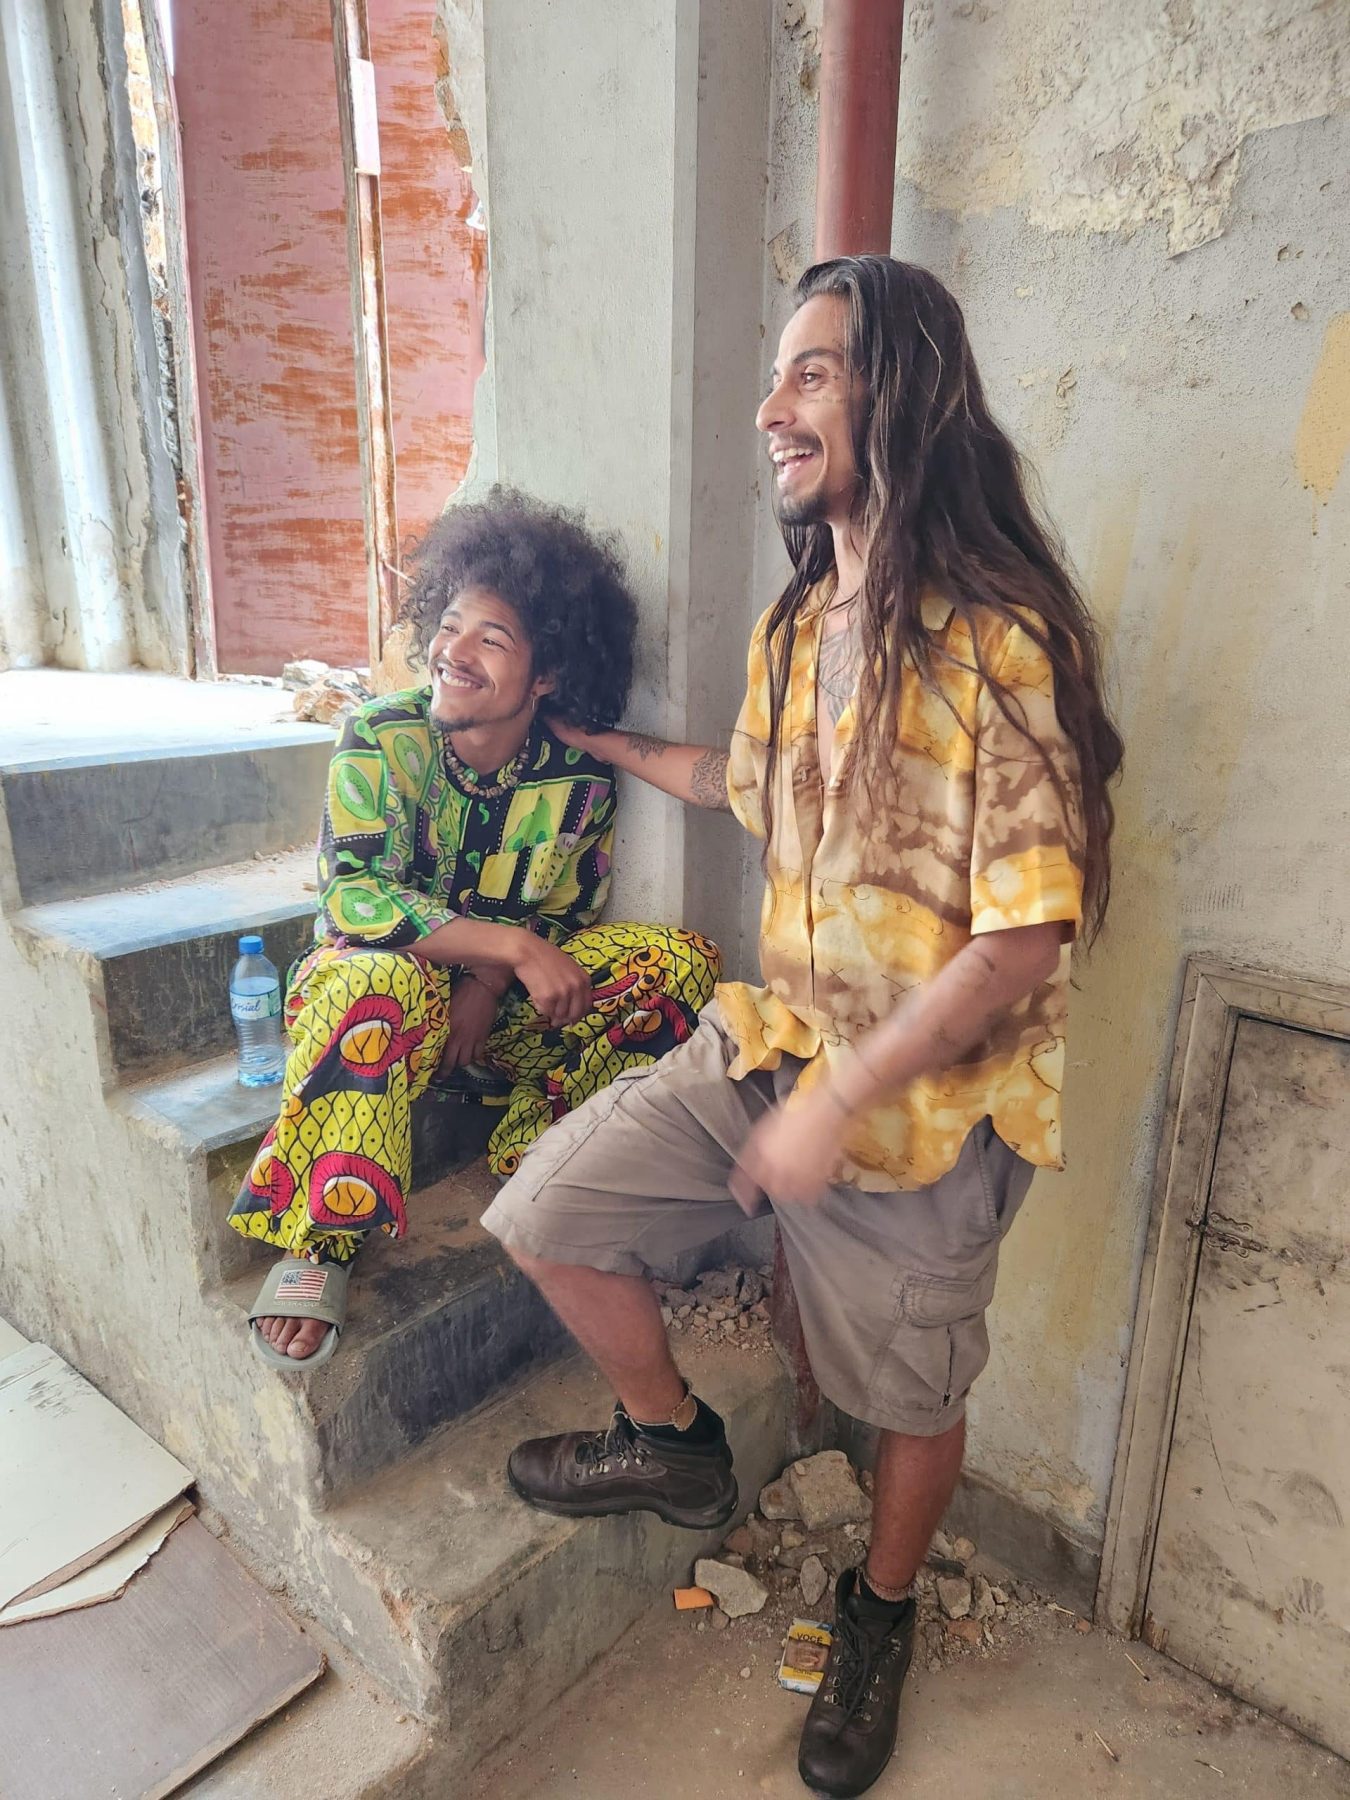 Two men, one with long hair and his hand on the shoulder of the other man, who is sitting. Both are smiling. The man on the right is wearing a yellow shirt and shorts. The man on the left is wearing a patterned green shirt and pants.